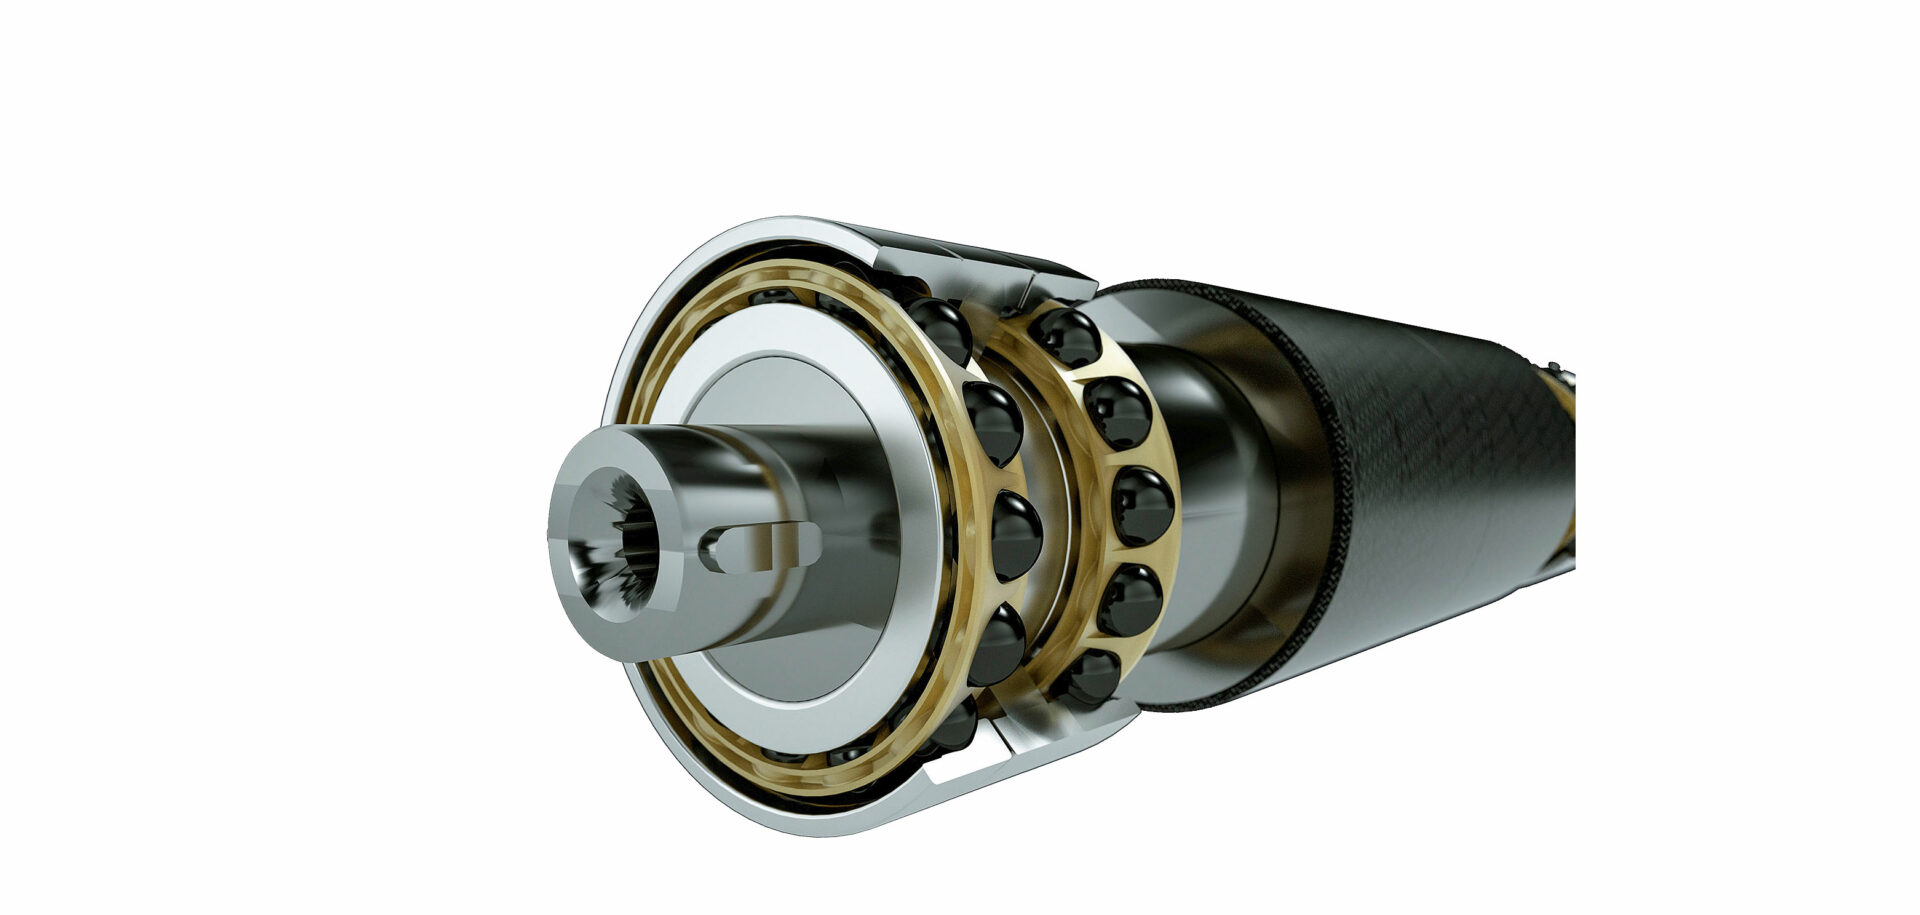 Benefits of hybrid bearings in severe conditions